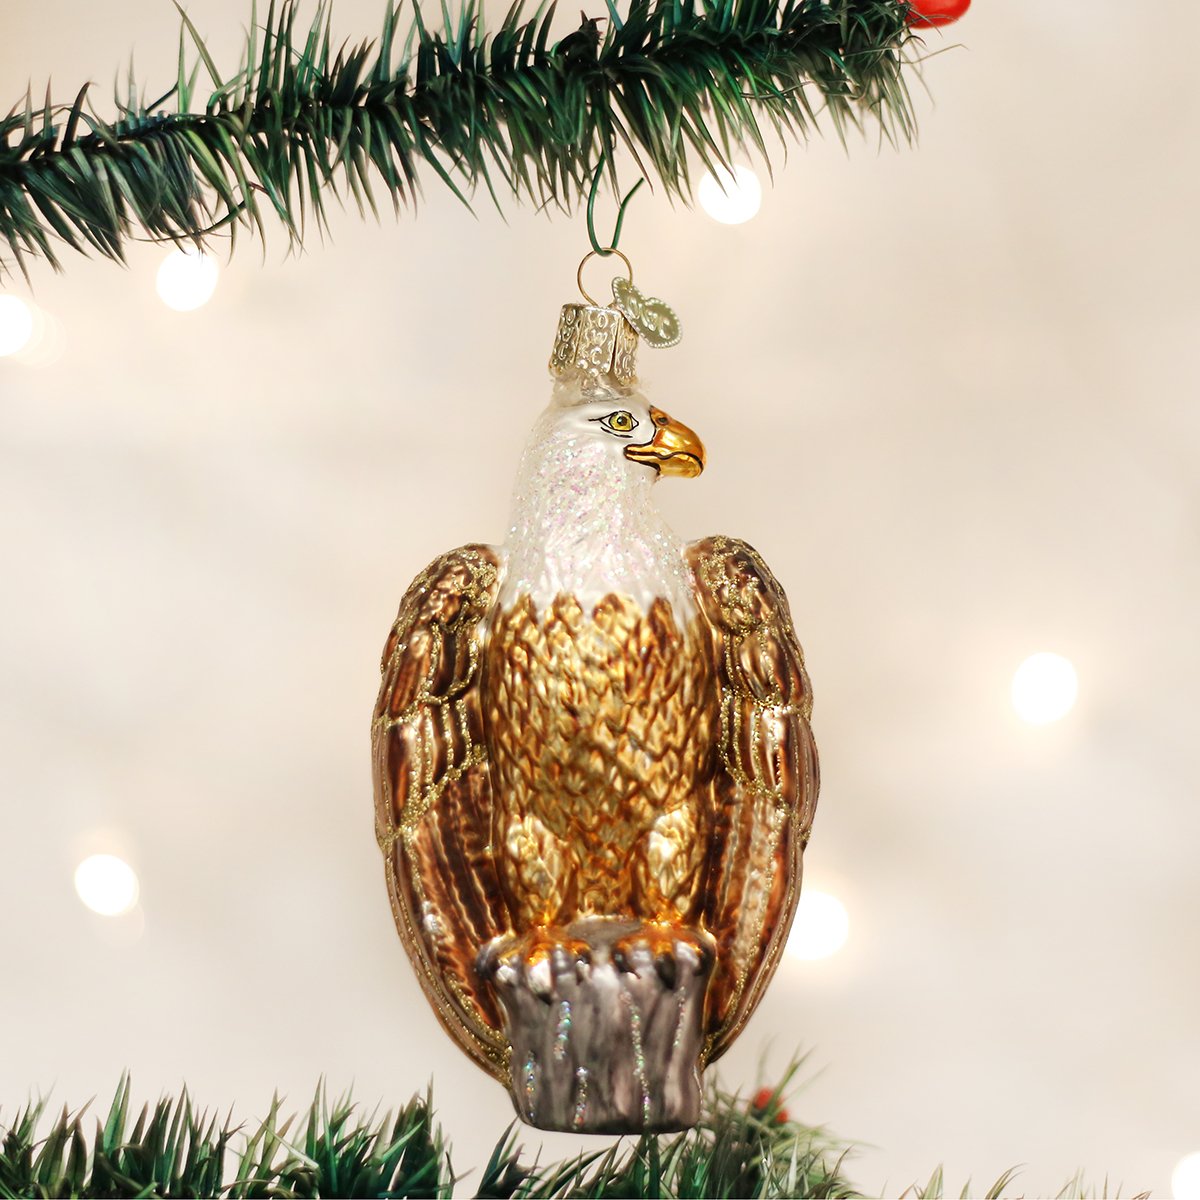 bald eagle ornament for christmas tree from old world christmas united states of america usa symbol of the us